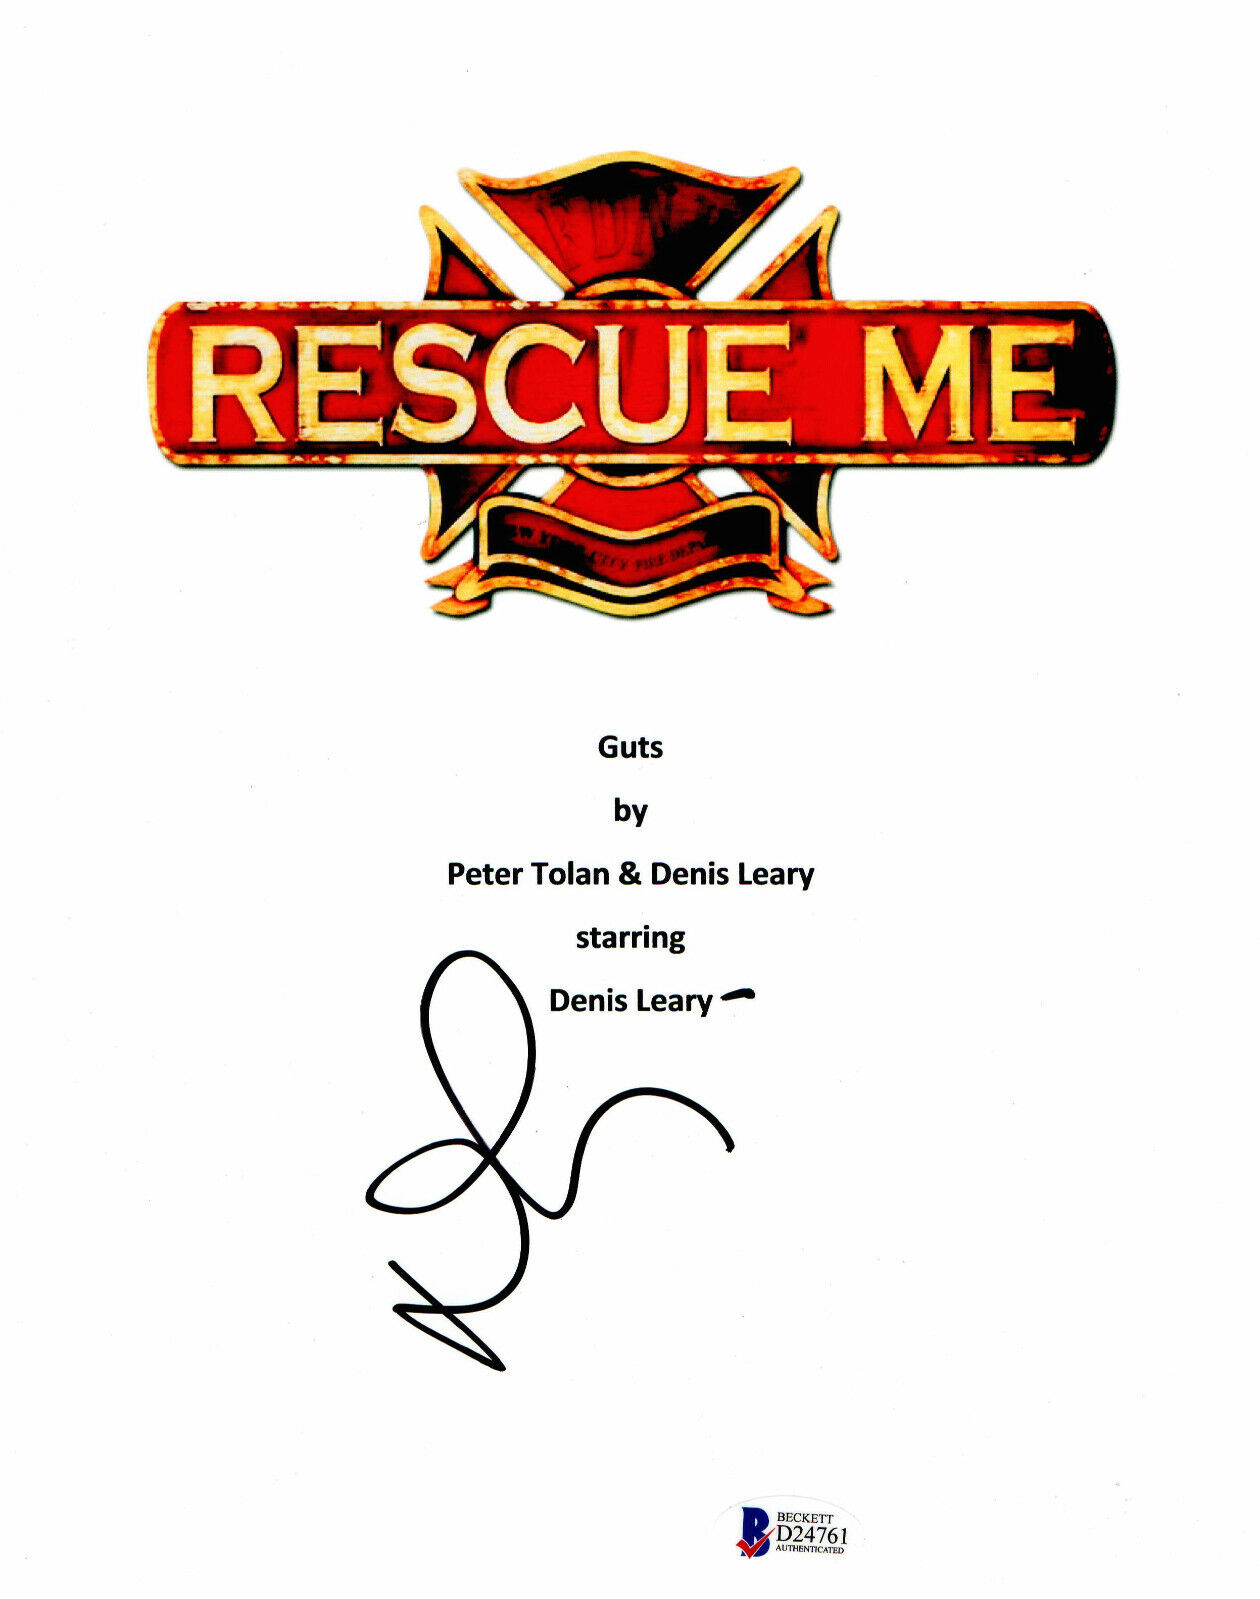 DENIS LEARY SIGNED AUTOGRAPH RESCUE ME FULL SCRIPT BECKETT BAS 